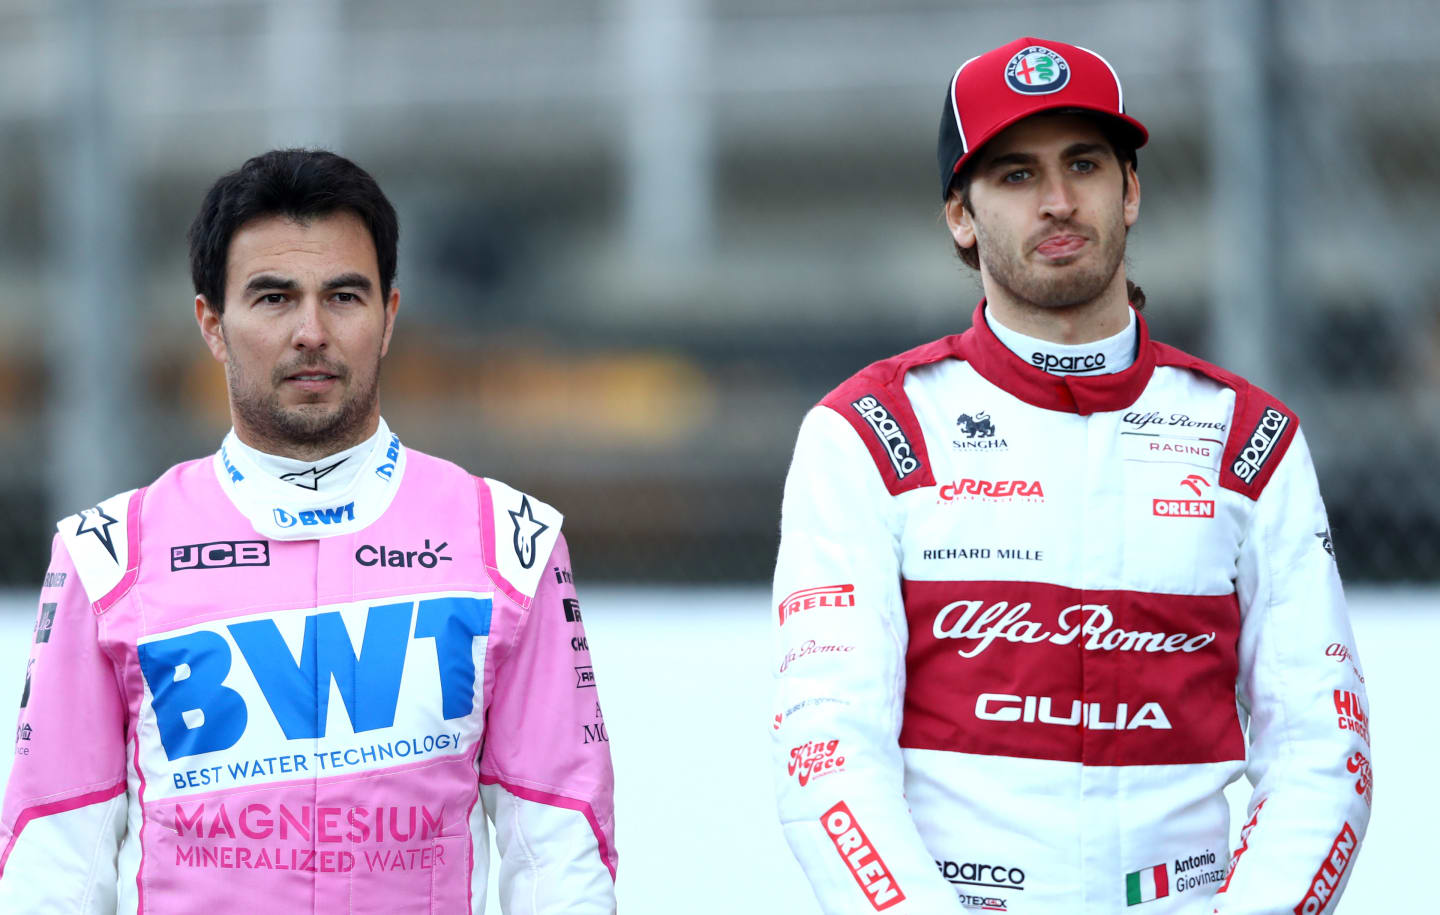 BARCELONA, SPAIN - FEBRUARY 19: Sergio Perez of Mexico and Racing Point and Antonio Giovinazzi of